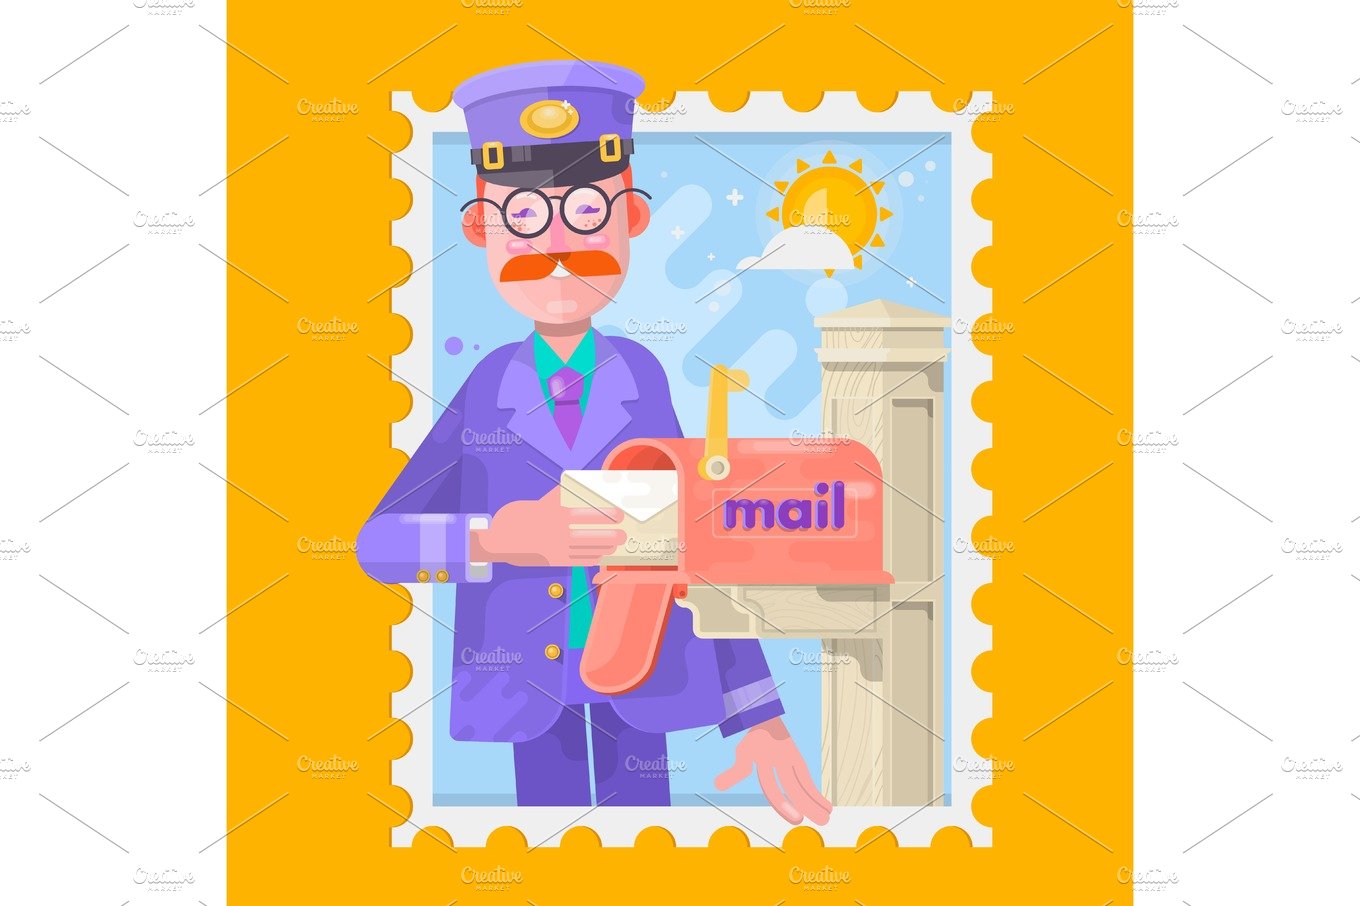 Postman In Purple Uniform Delivering Mail, Putting Letters In Mailbox. Flat... cover image.